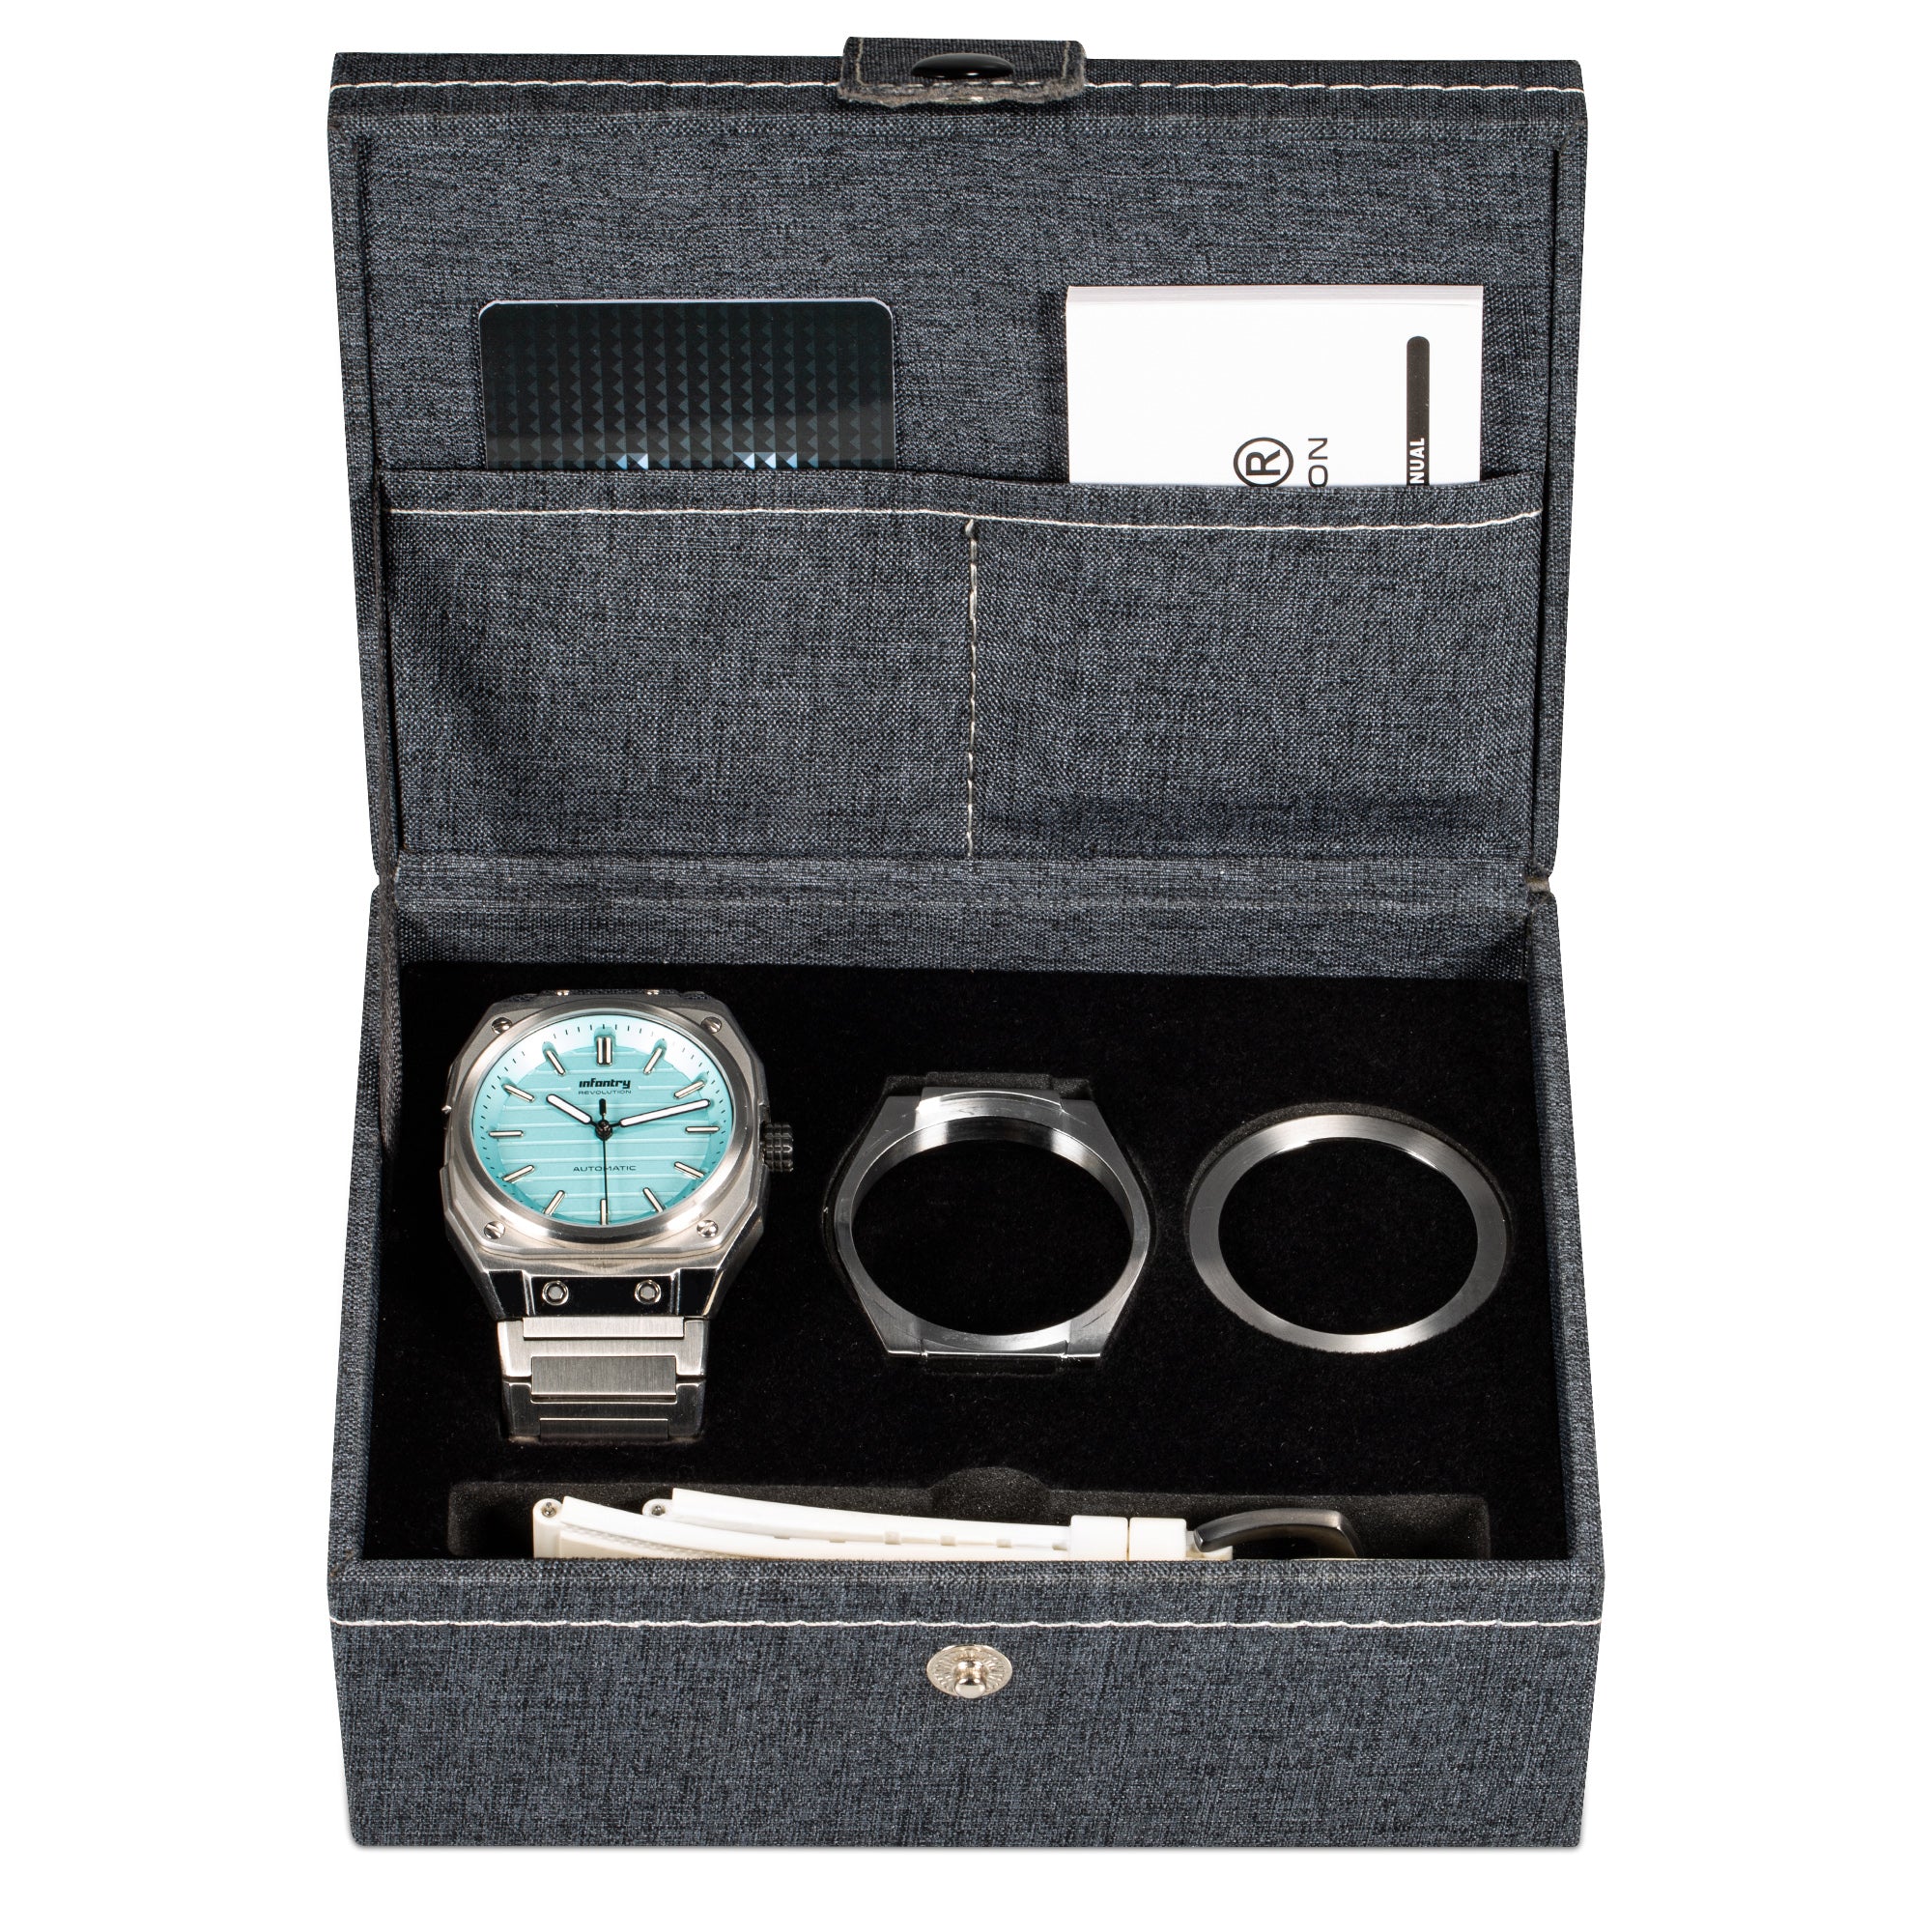 MOD SET - The Turquoise limited edition